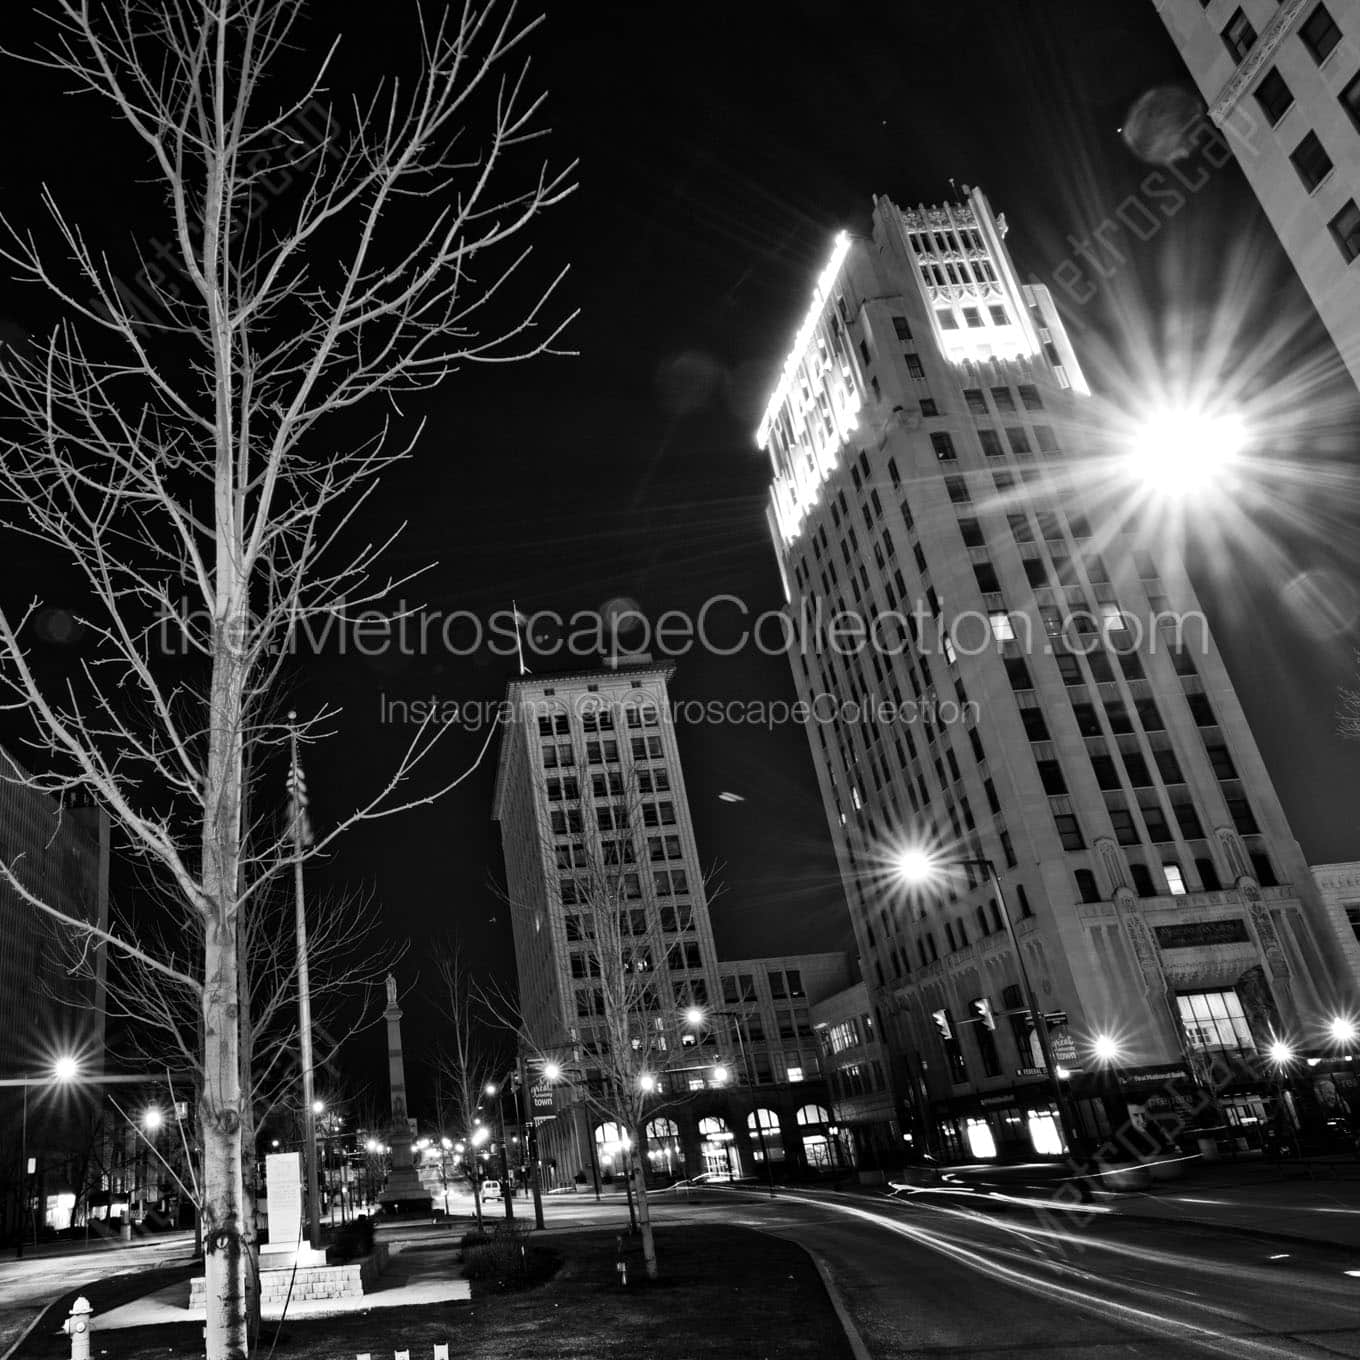 youngstown market street at night Black & White Office Art